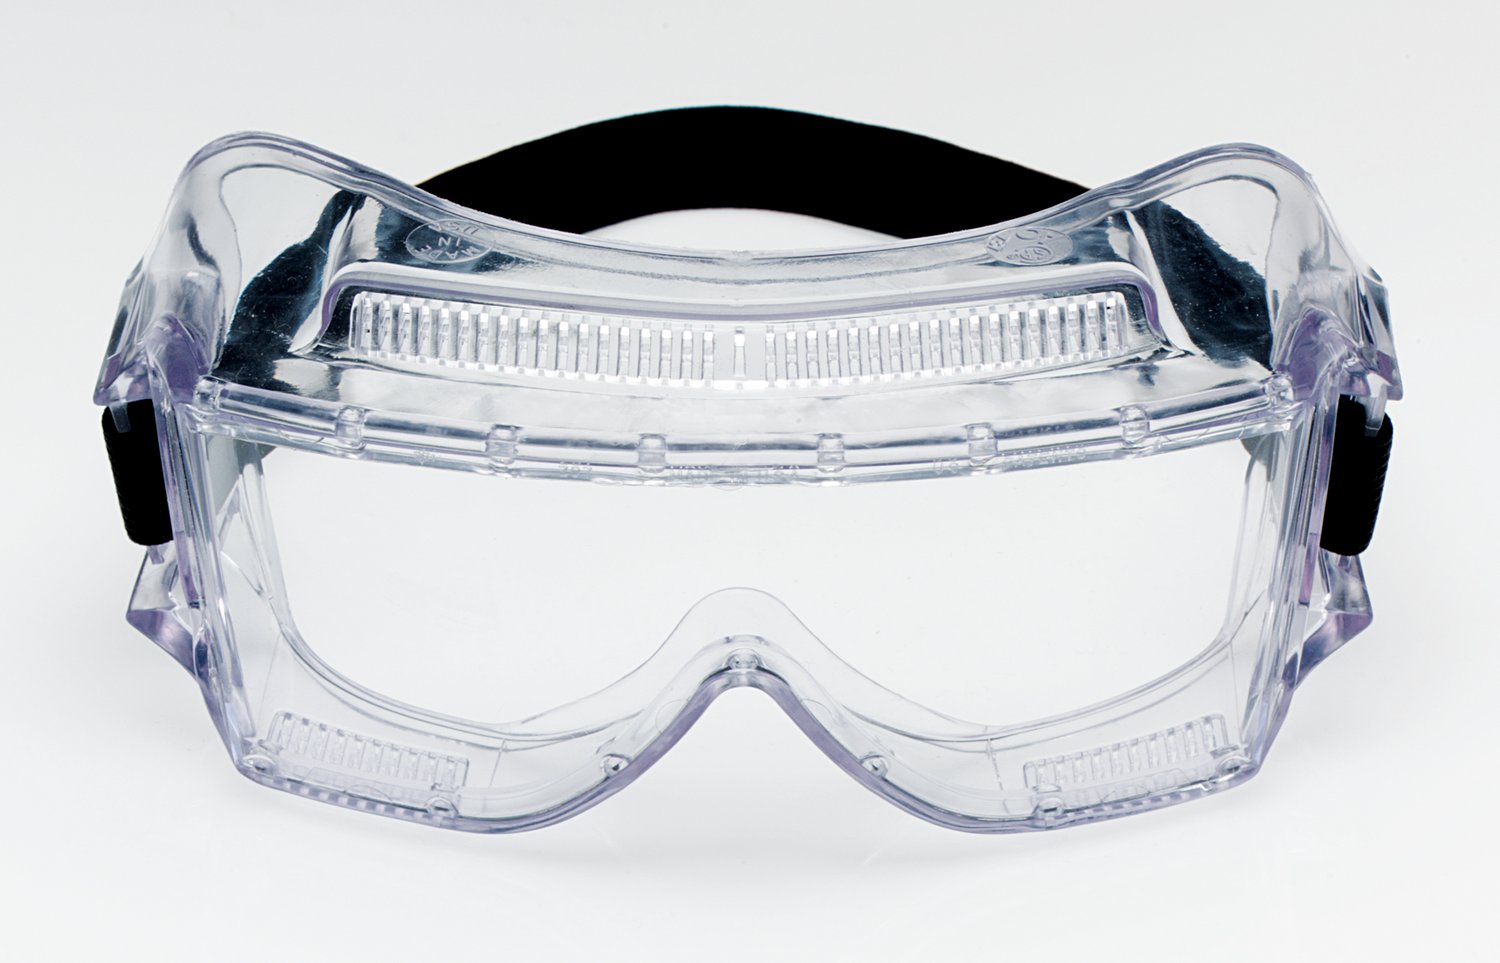 7000127564 - 3M Centurion Impact Safety Goggles 452 40300-00000-10, Clear Lens, 10
ea/Case